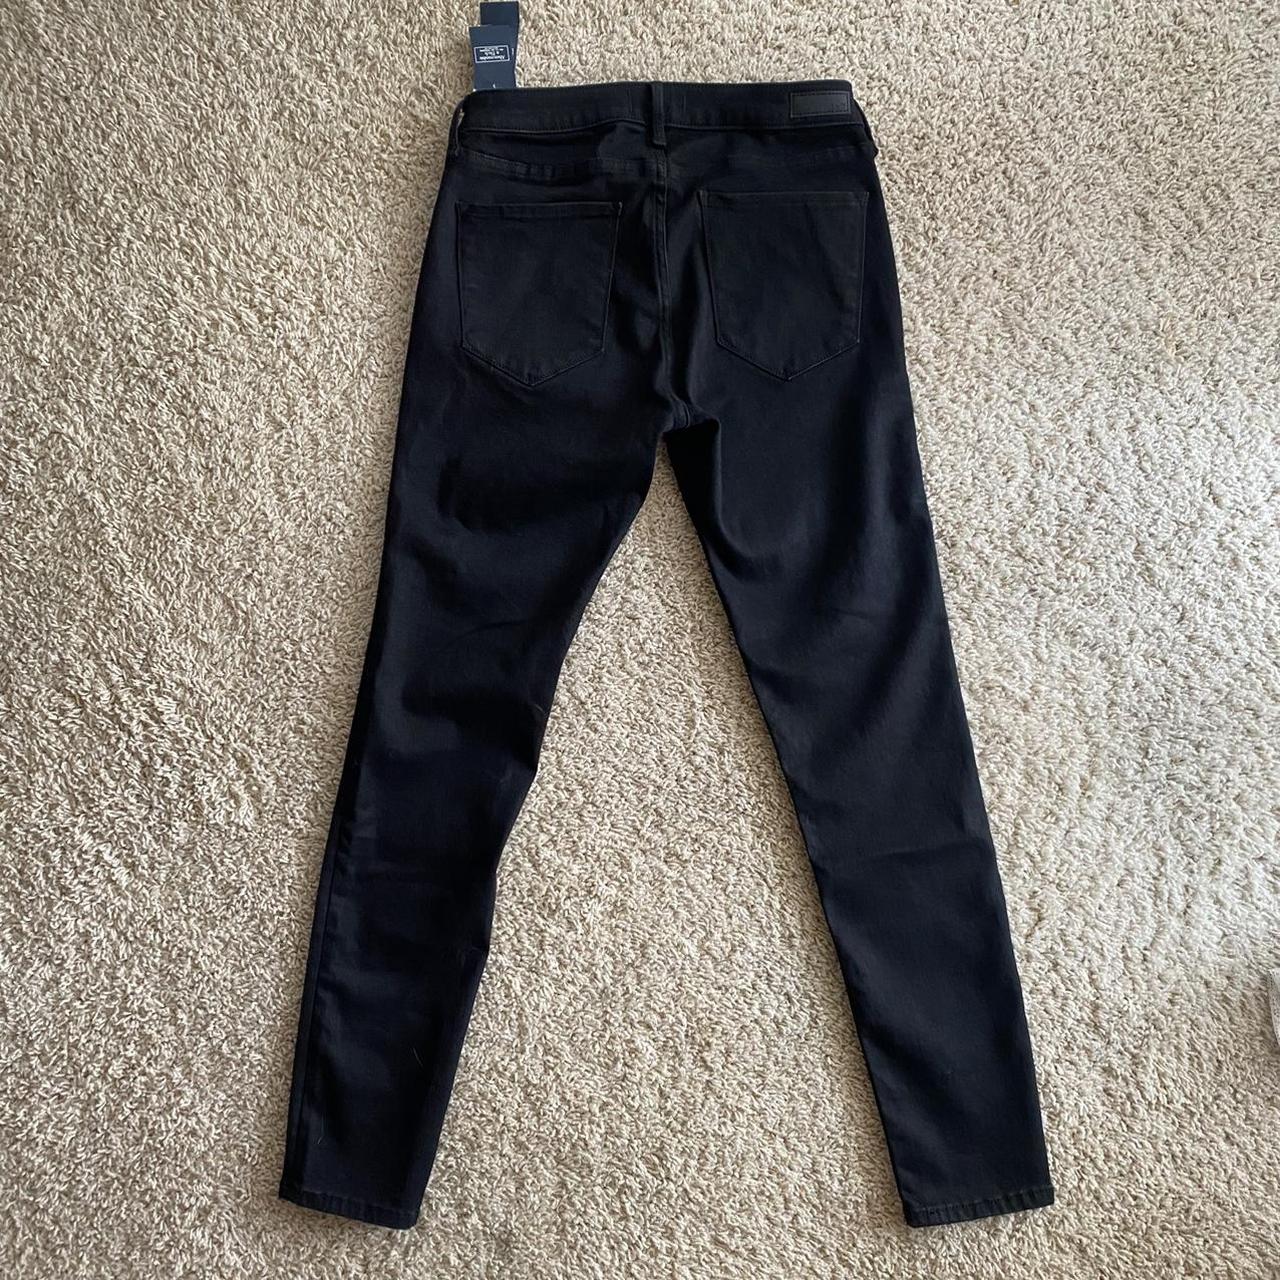 Abercrombie & Fitch mid rise skinny jean. Brand new, - Depop